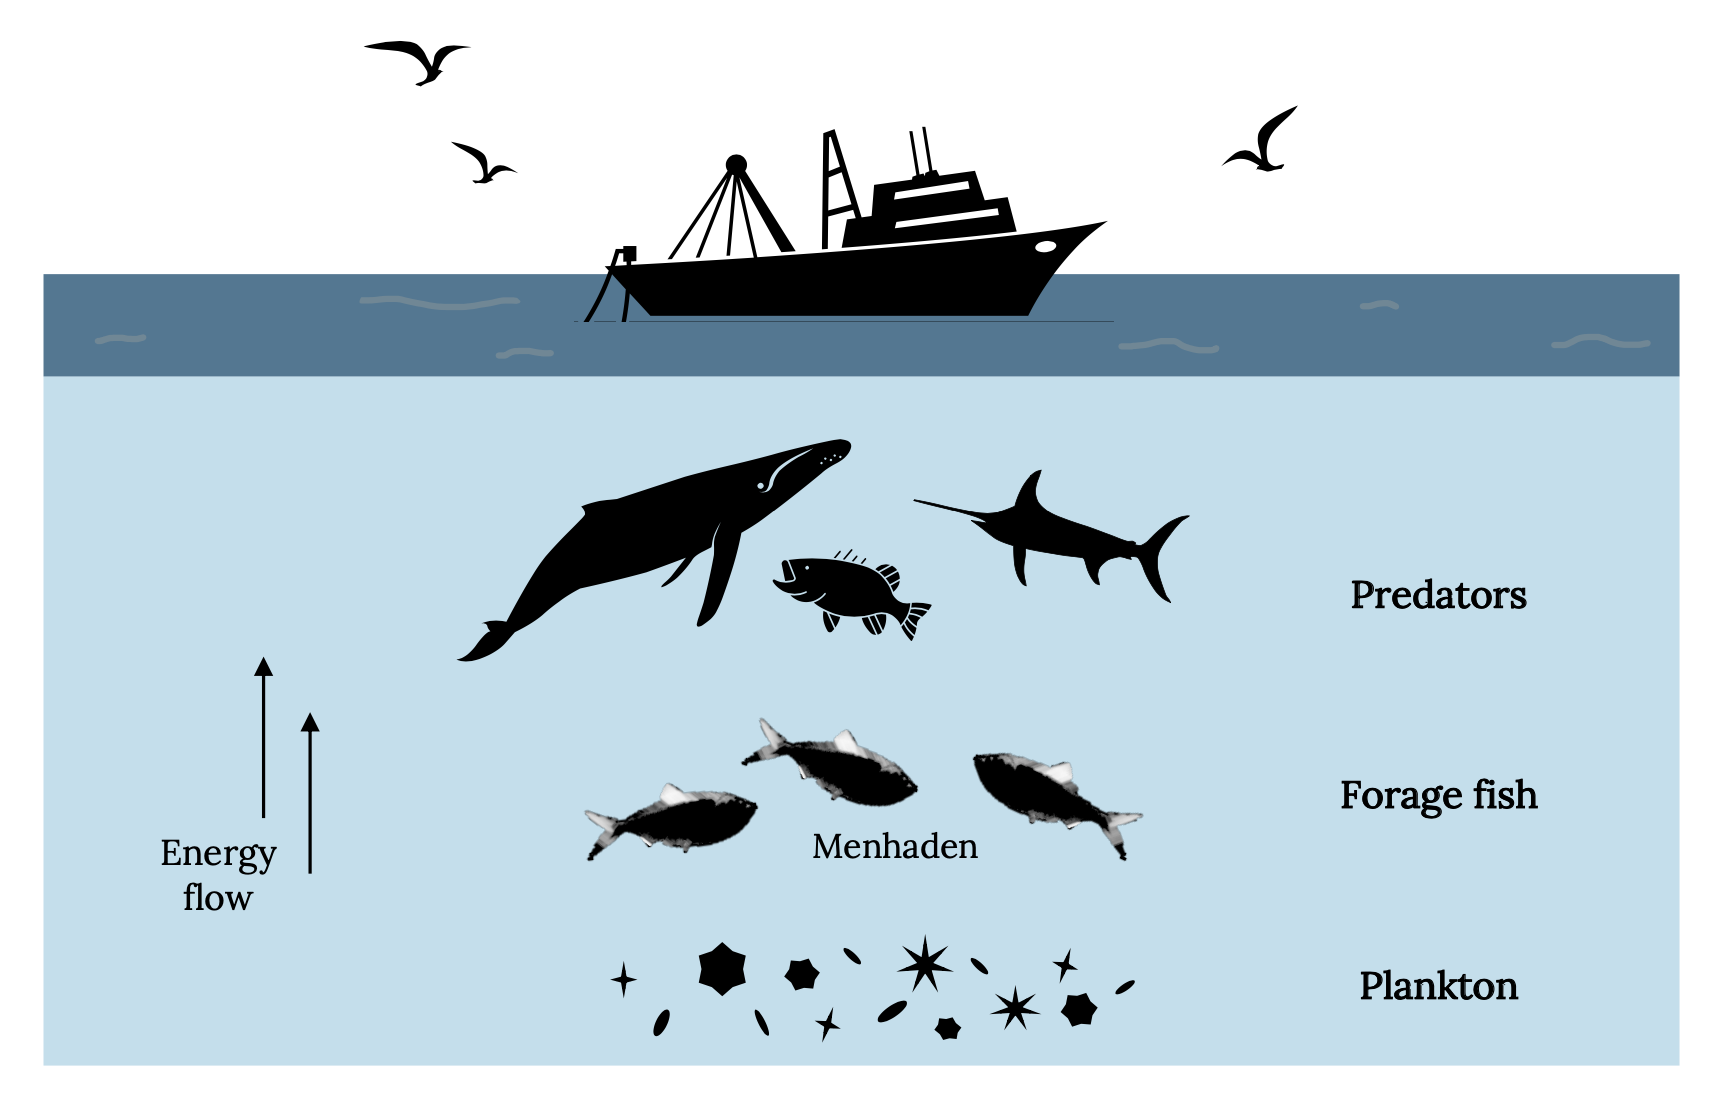 From smallest to largest organism: Plankton, forage fish, predators. Energy flows from bottom to top.